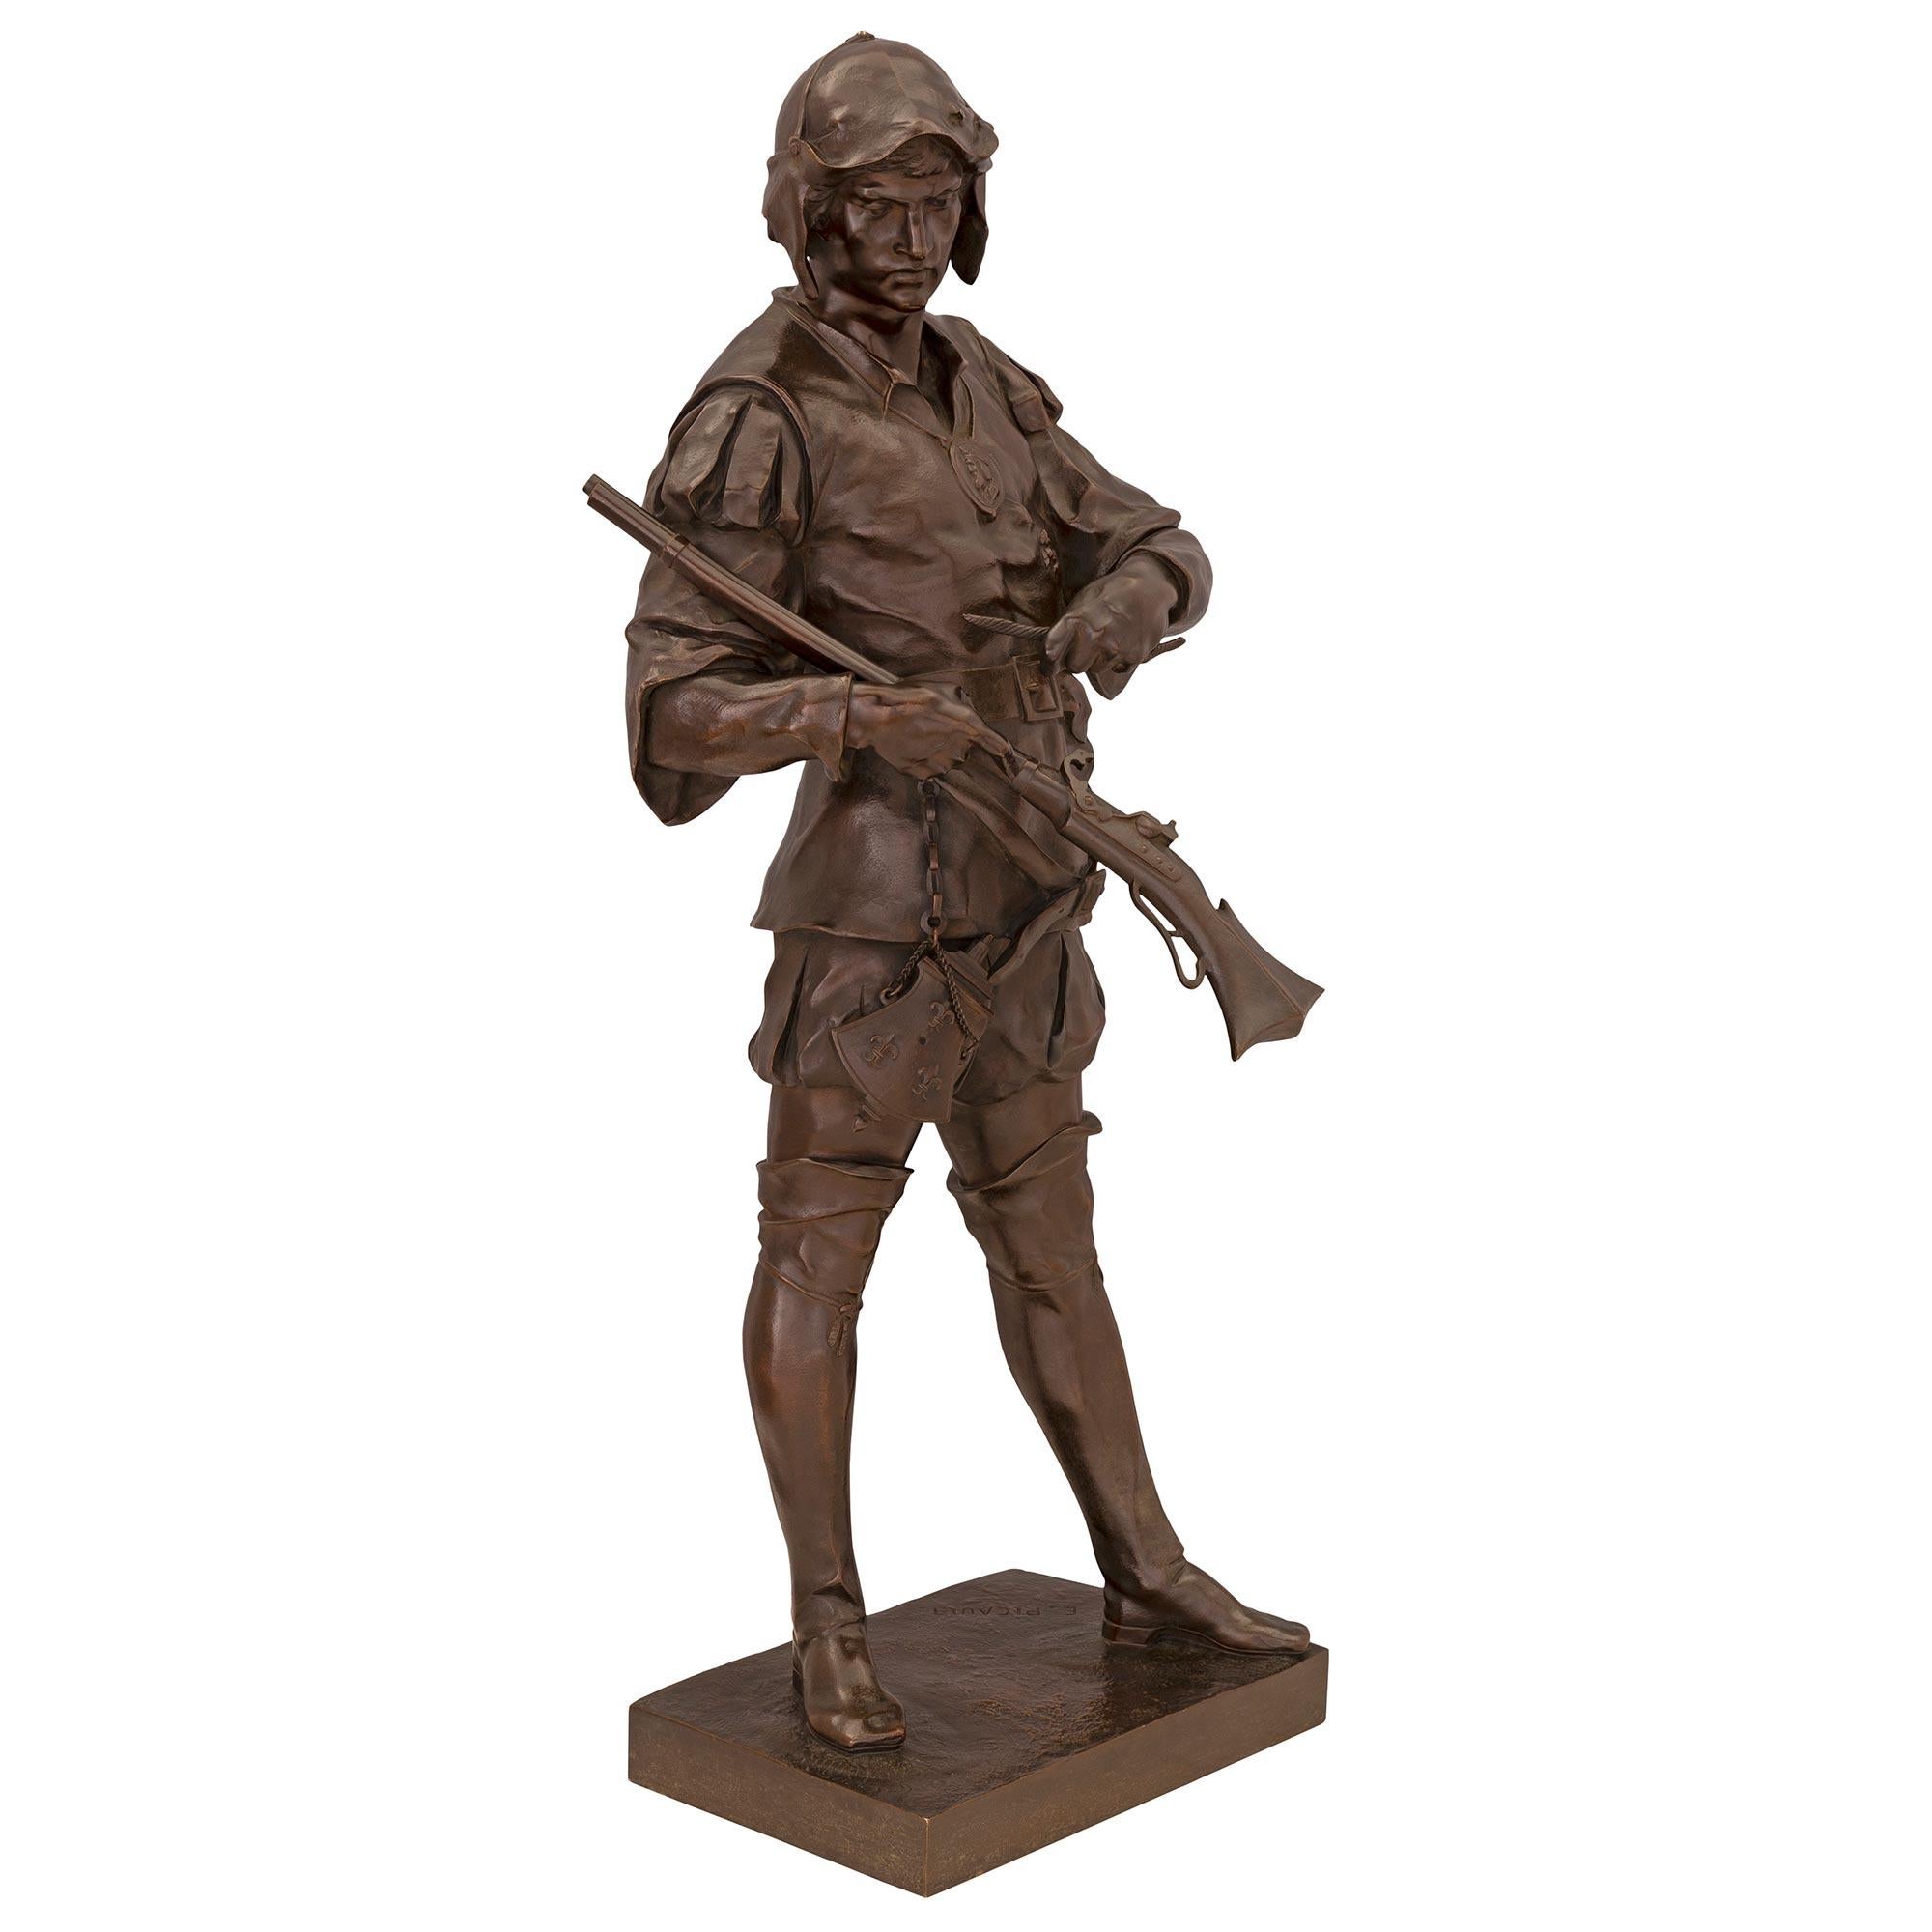 A striking and very high quality French 19th century patinated bronze statue of a young soldier, signed E. Picault. The large scale statue depicts a young soldier wearing high boots and his uniform, with a belt tied around his waist and a gunpowder